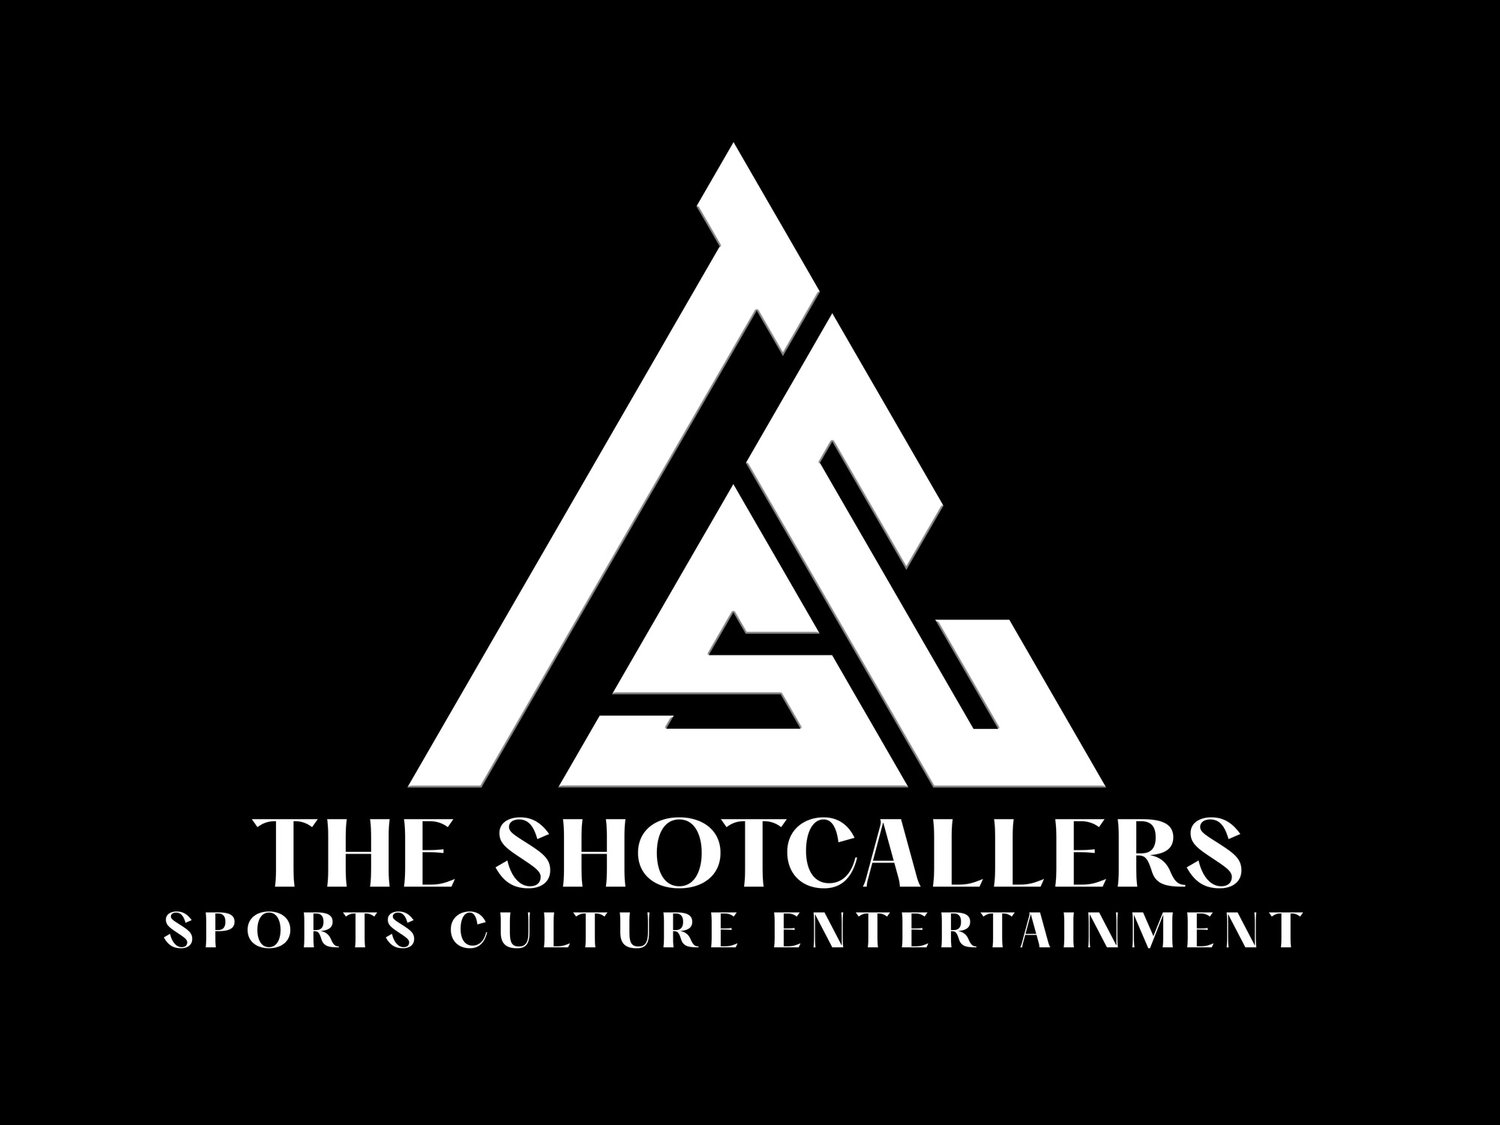 The Shotcallers